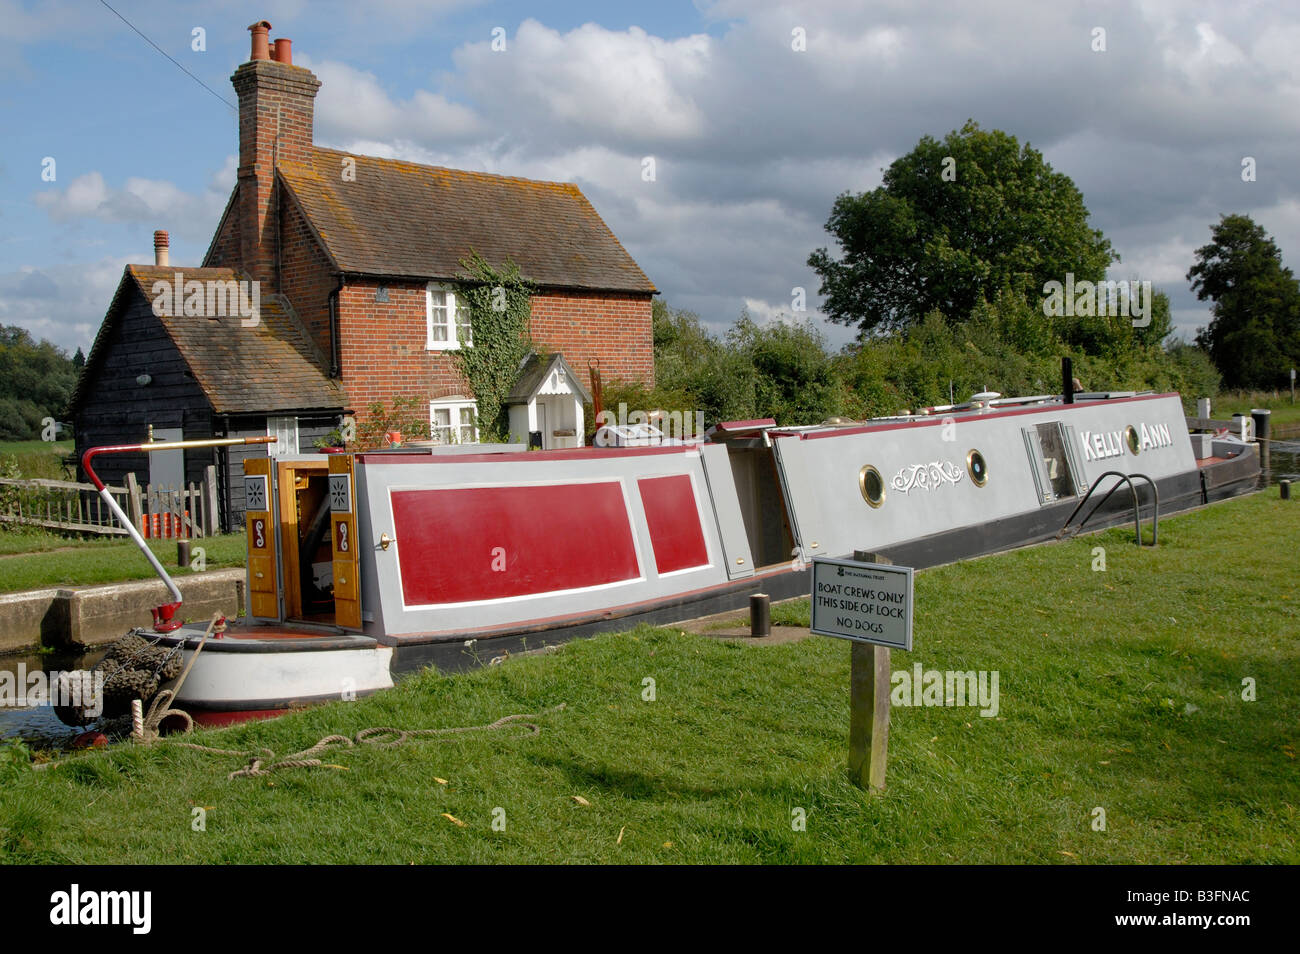 Traditional narrowboat passing through Triggs Lock on the River Wey Navigation near Woking, Surrey, England Stock Photo